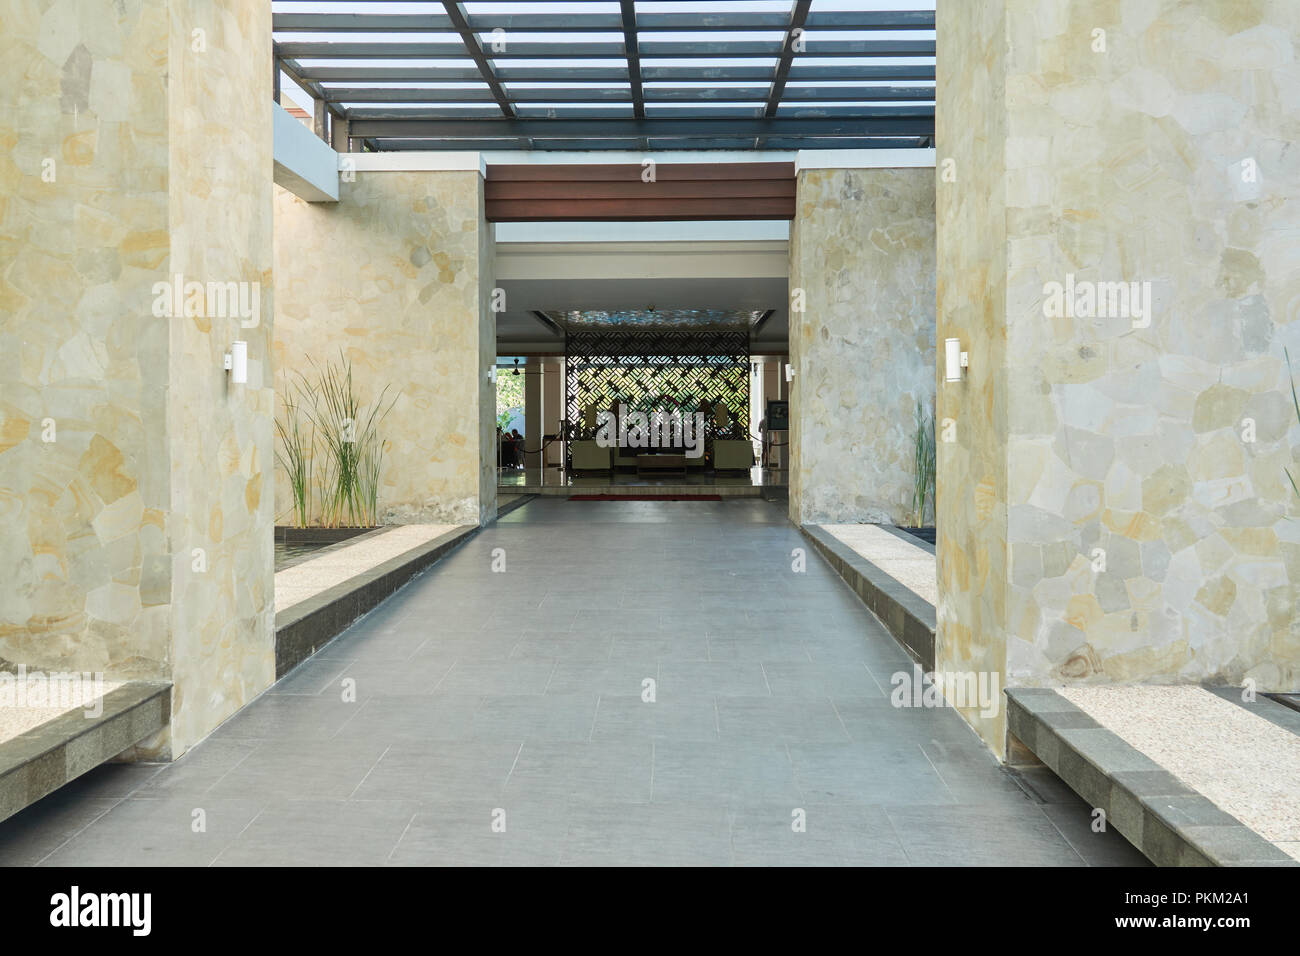 Entrance to the hotel. Interior corridor with columns without peoples. Stock Photo